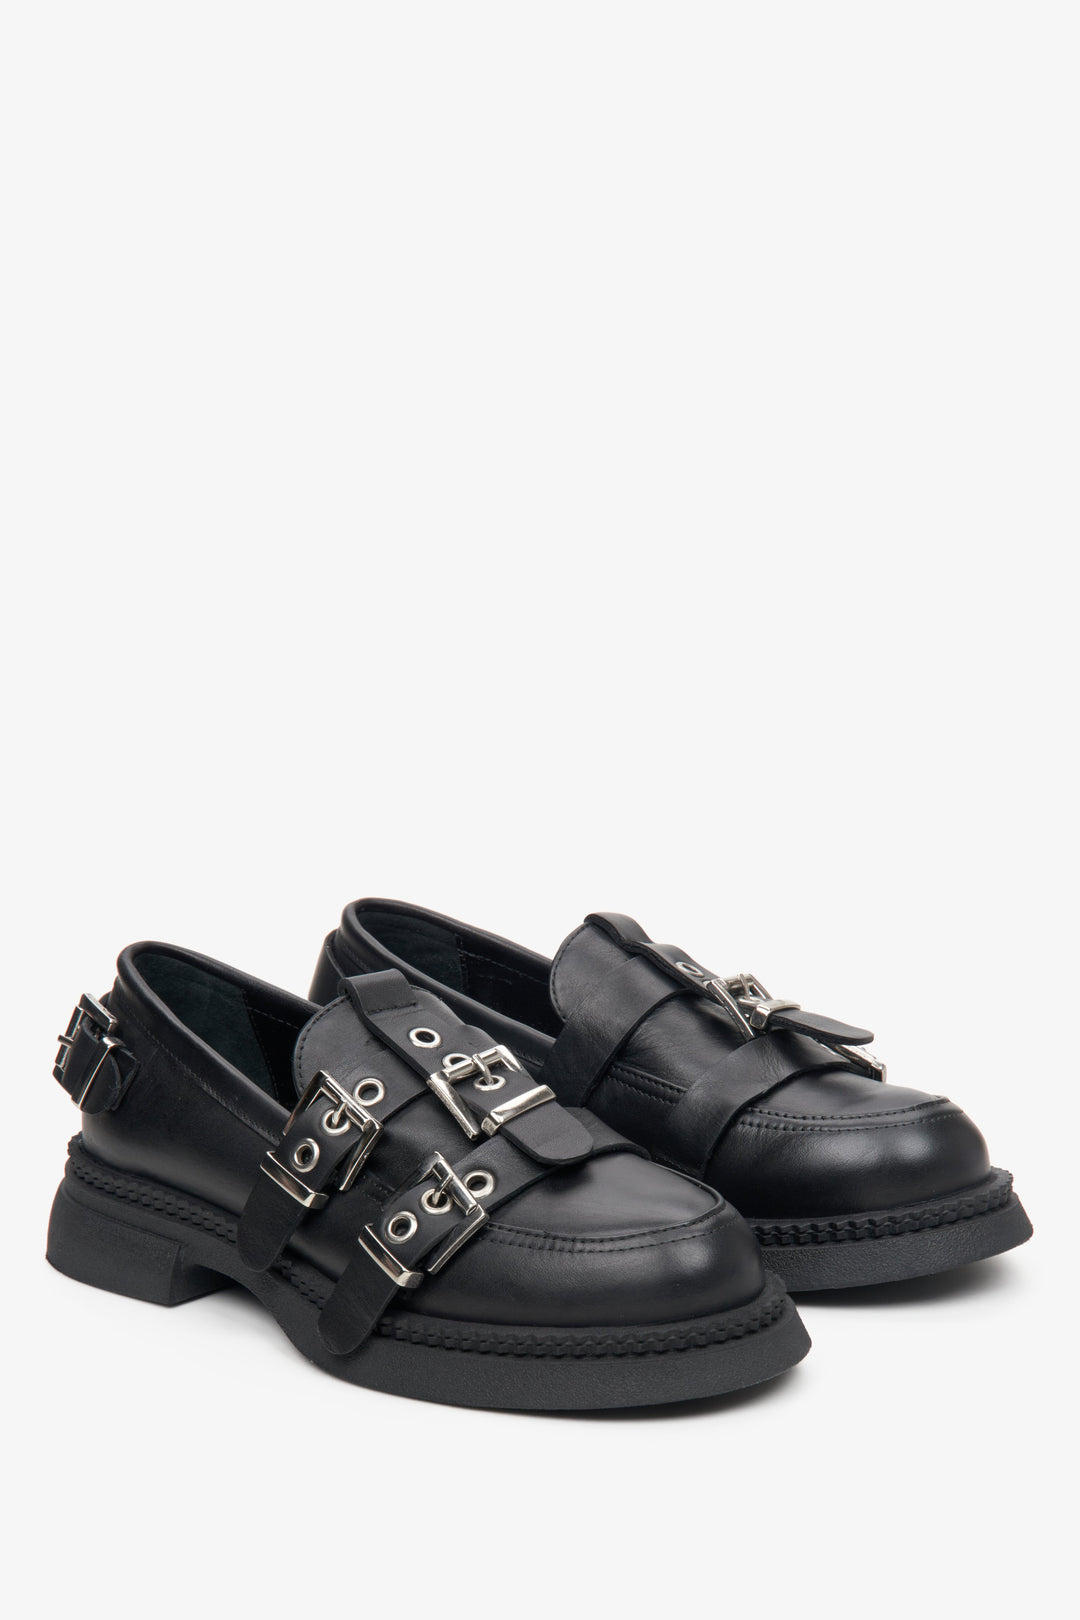 Women's black leather loafers with silver buckles.